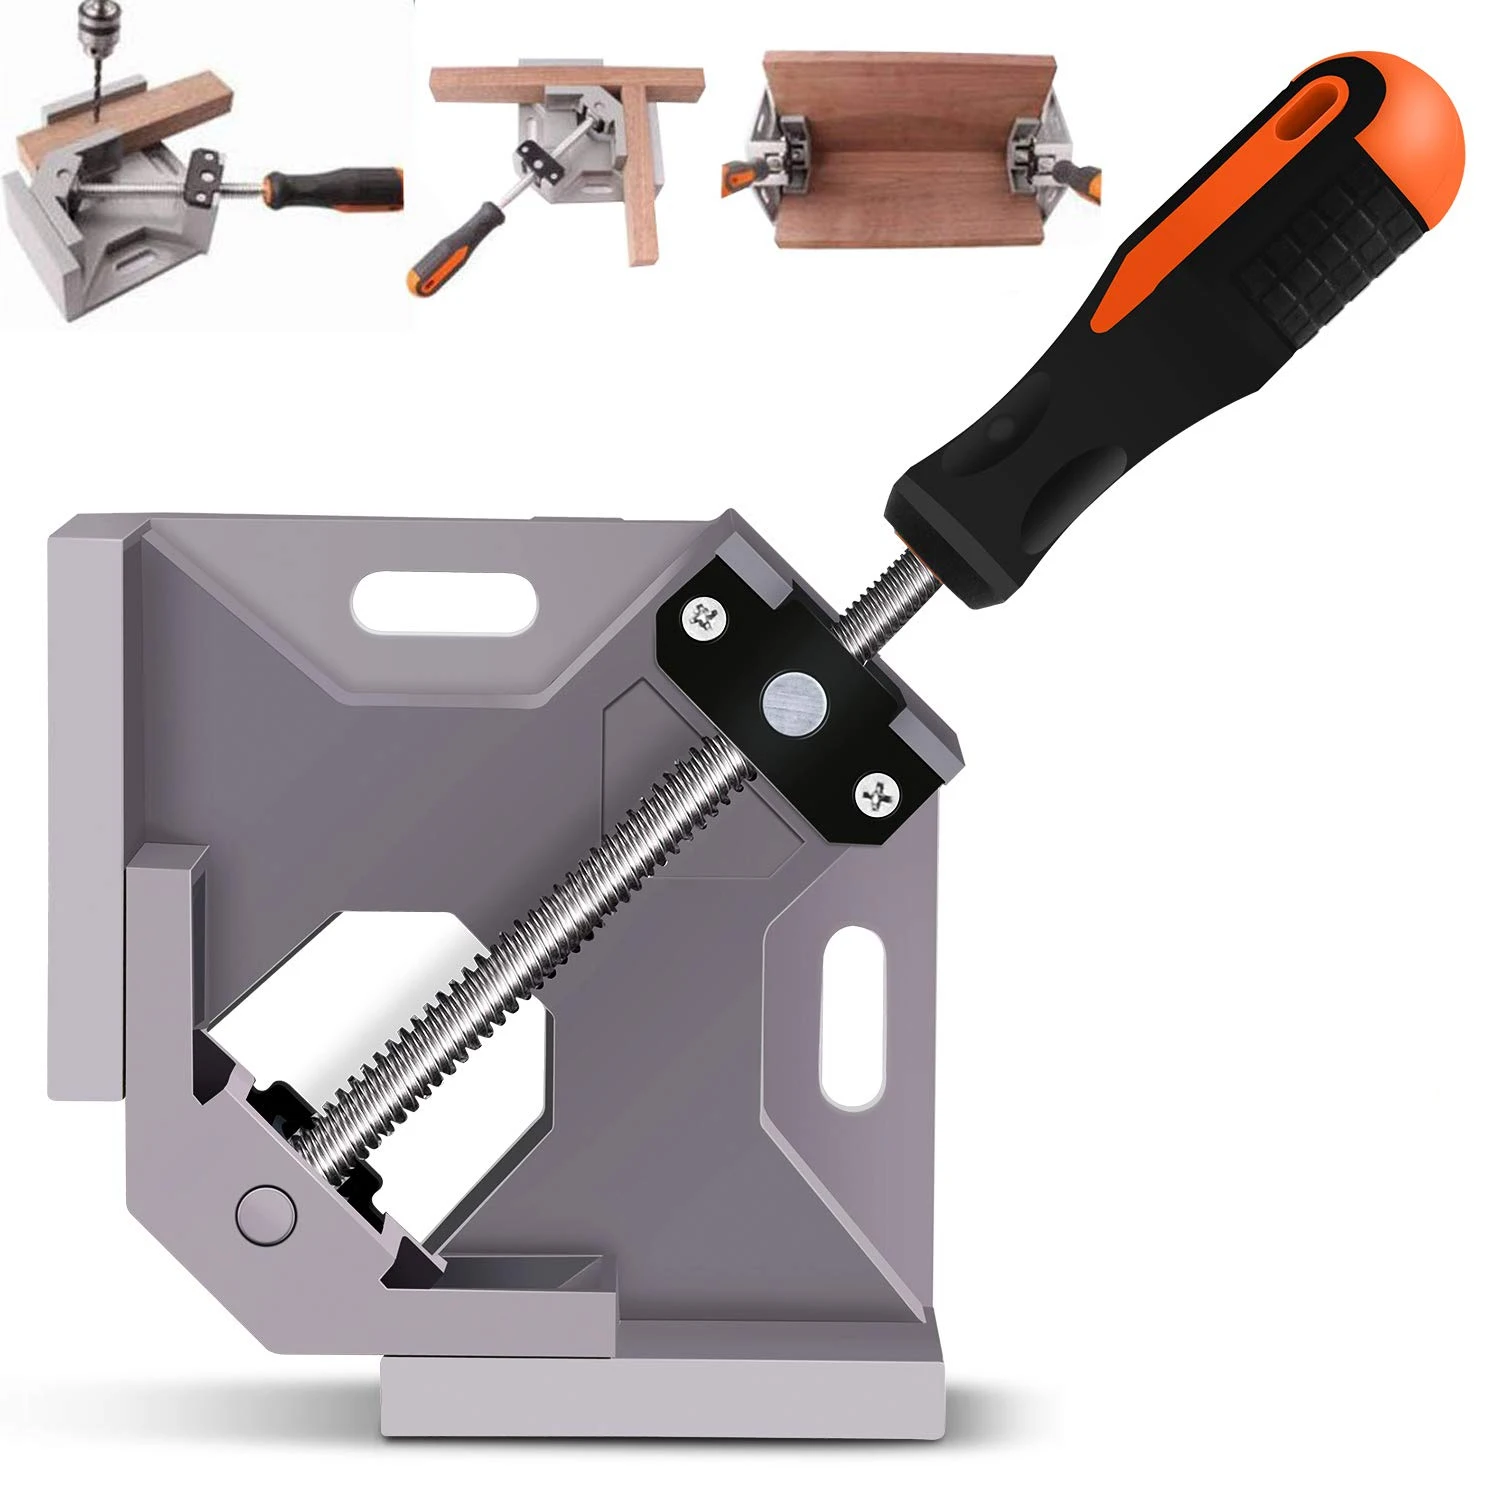 90 Degree Corner Clamp Woodworking Right Angle Clamp With Adjustable Vise Fixing 